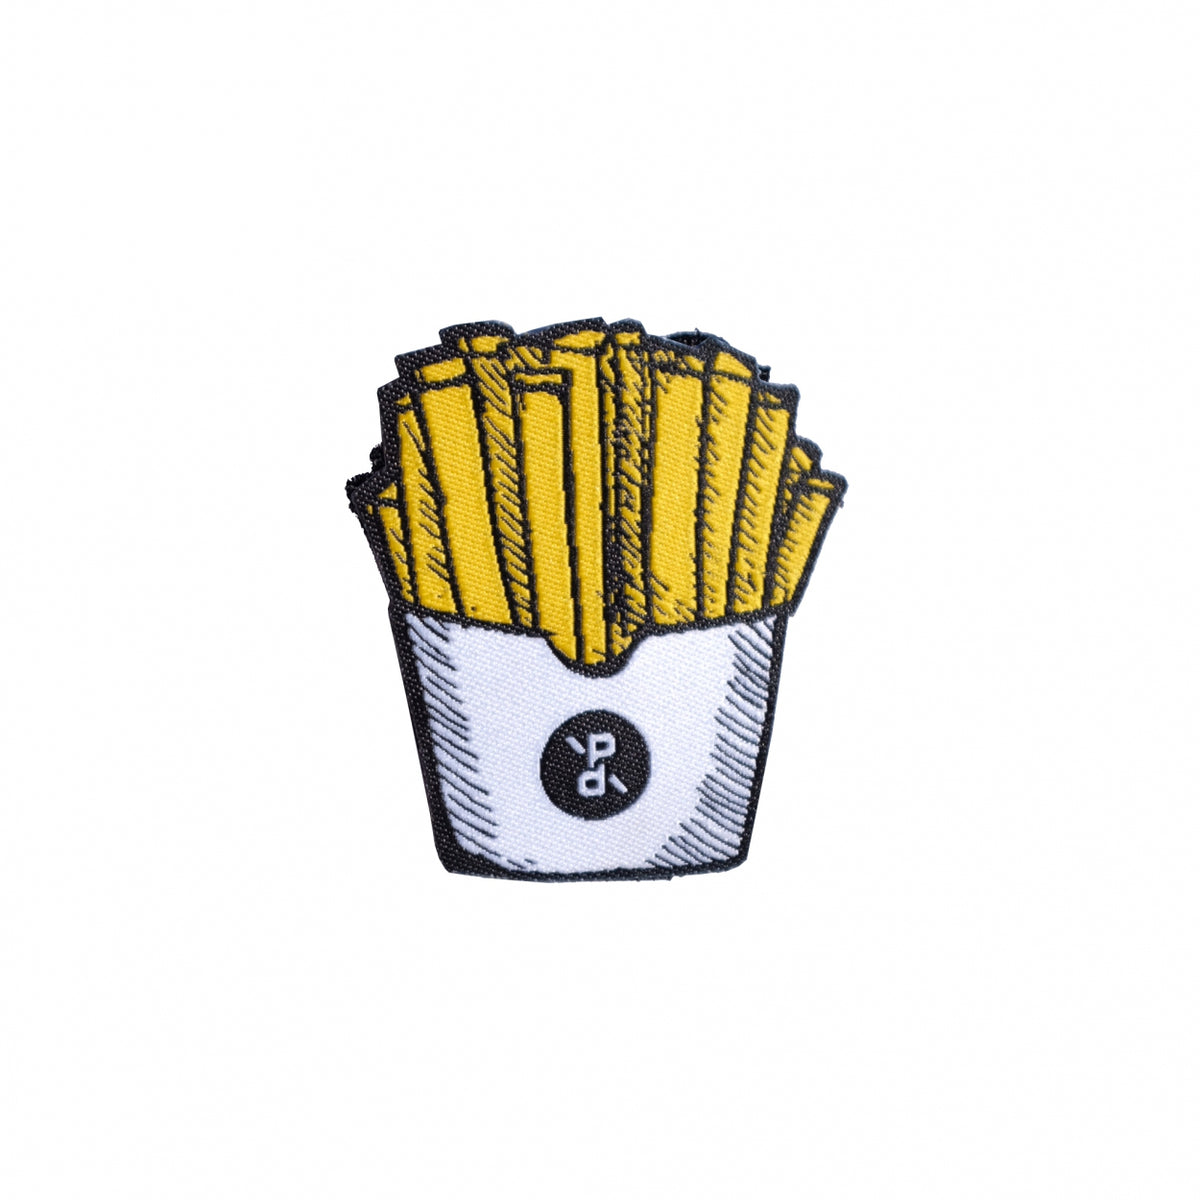 Velcro patch - Fries | Assorted white/yellow